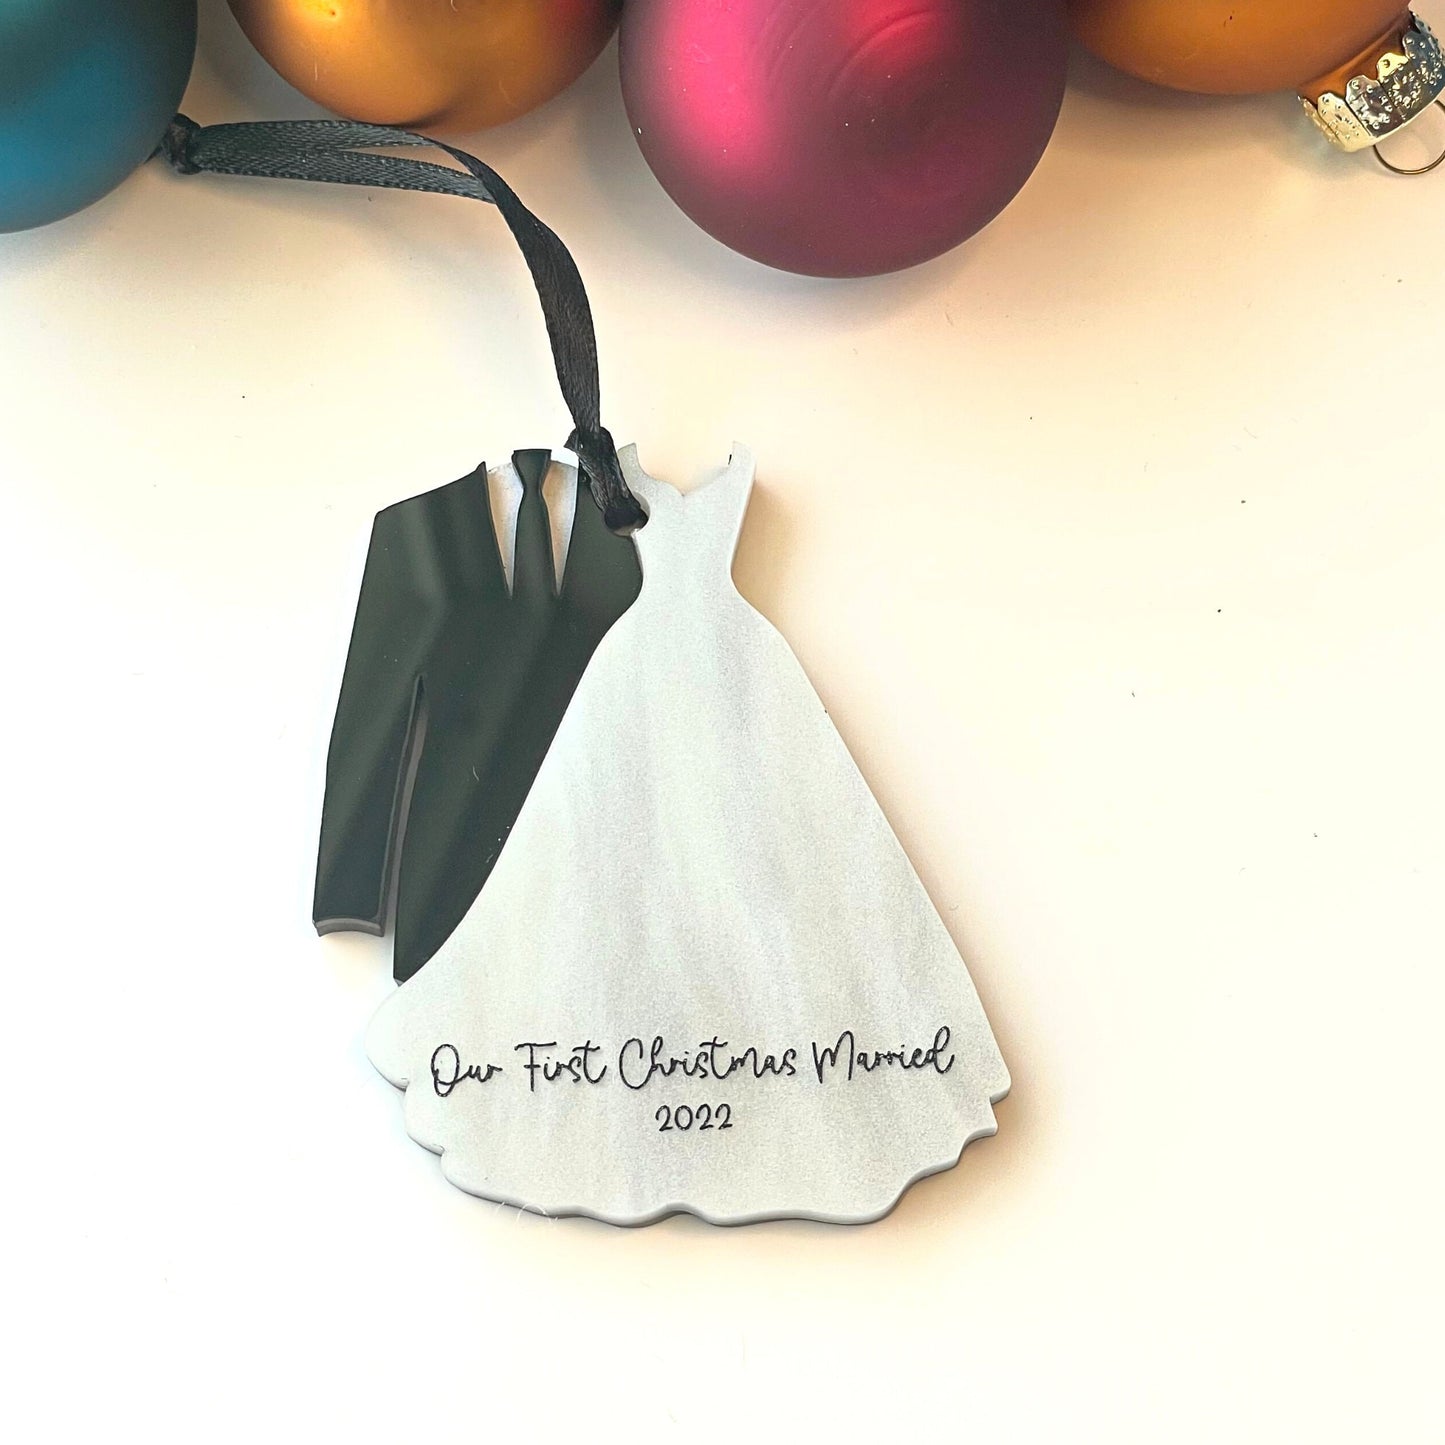 Custom Newlywed Ornament, Our First Christmas, First Christmas Married, Mr and Mrs Ornament